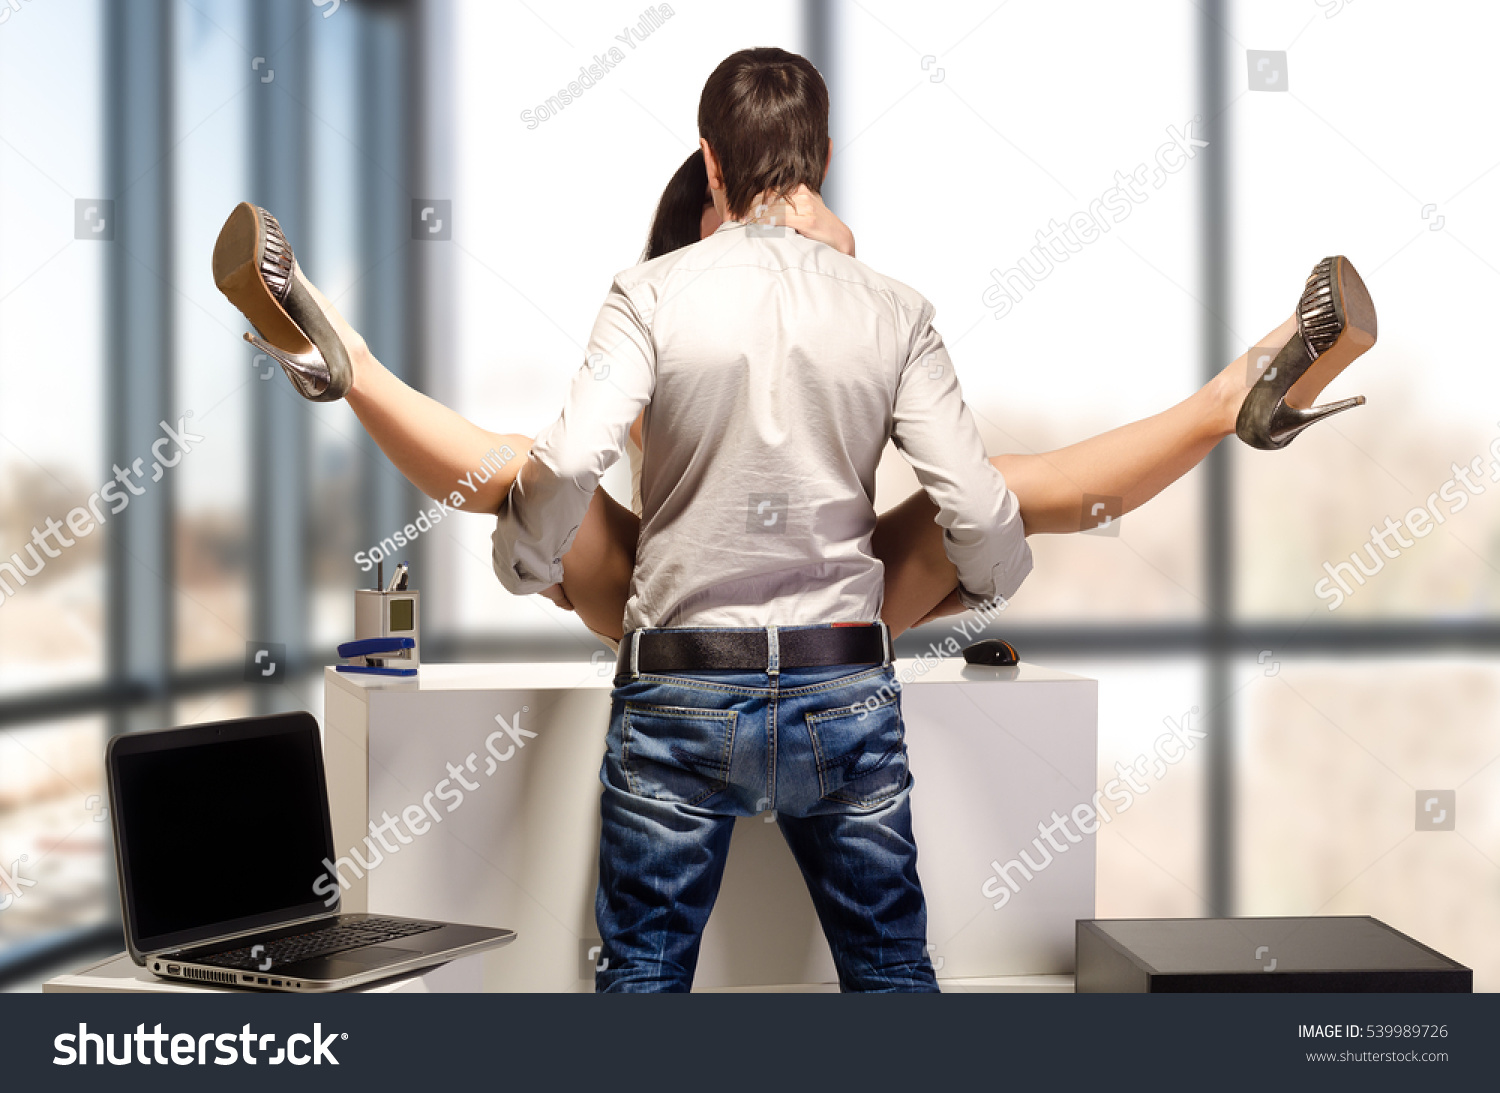 People Having Sex In The Office 27